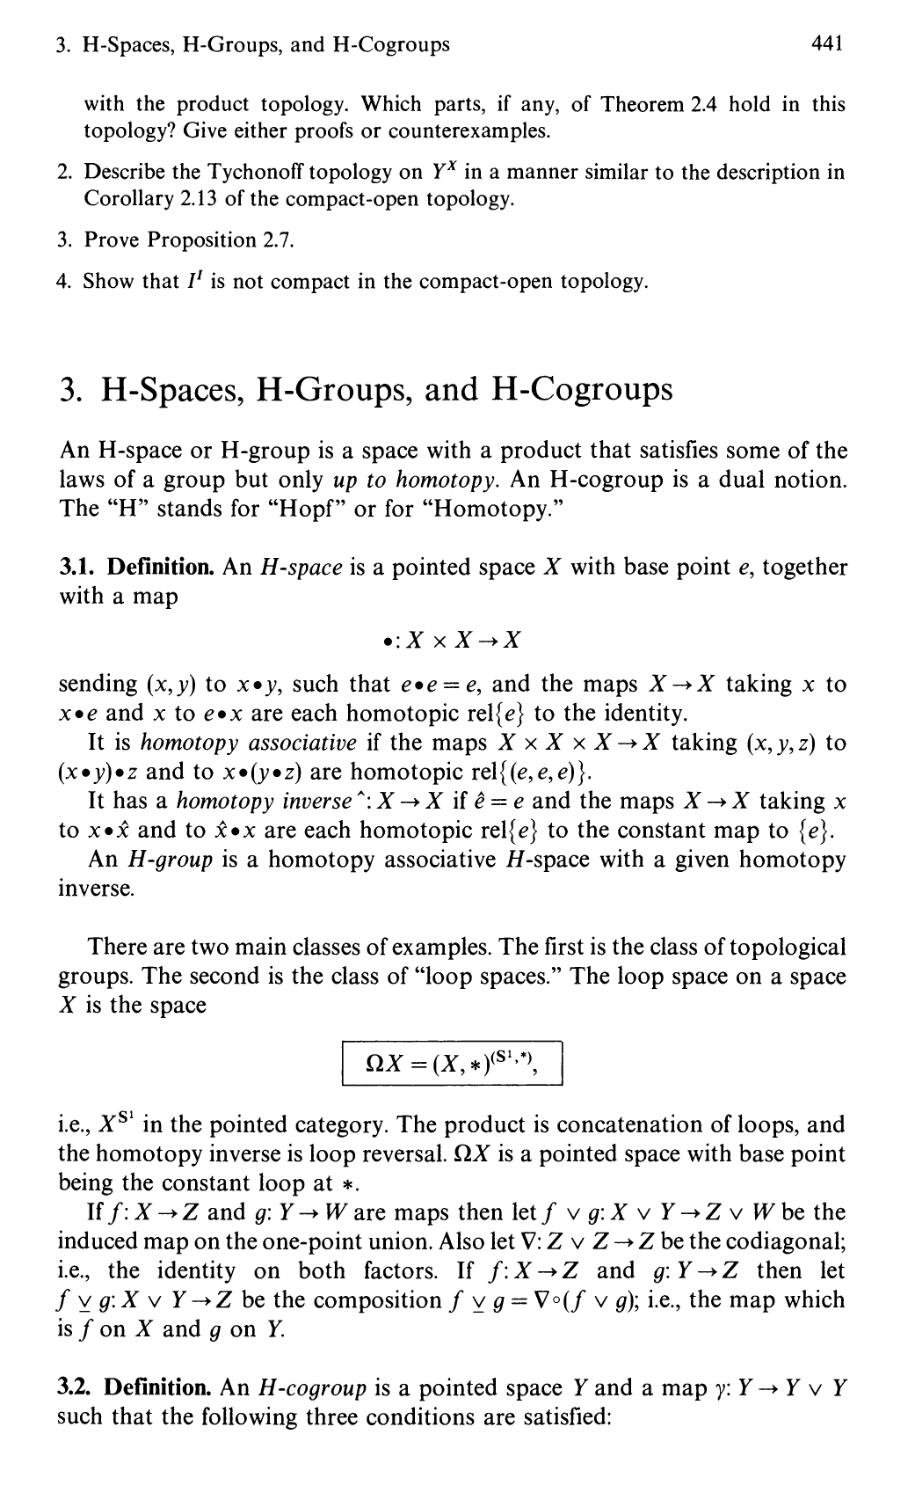 3. H-Spaces, H-Groups, and H-Cogroups